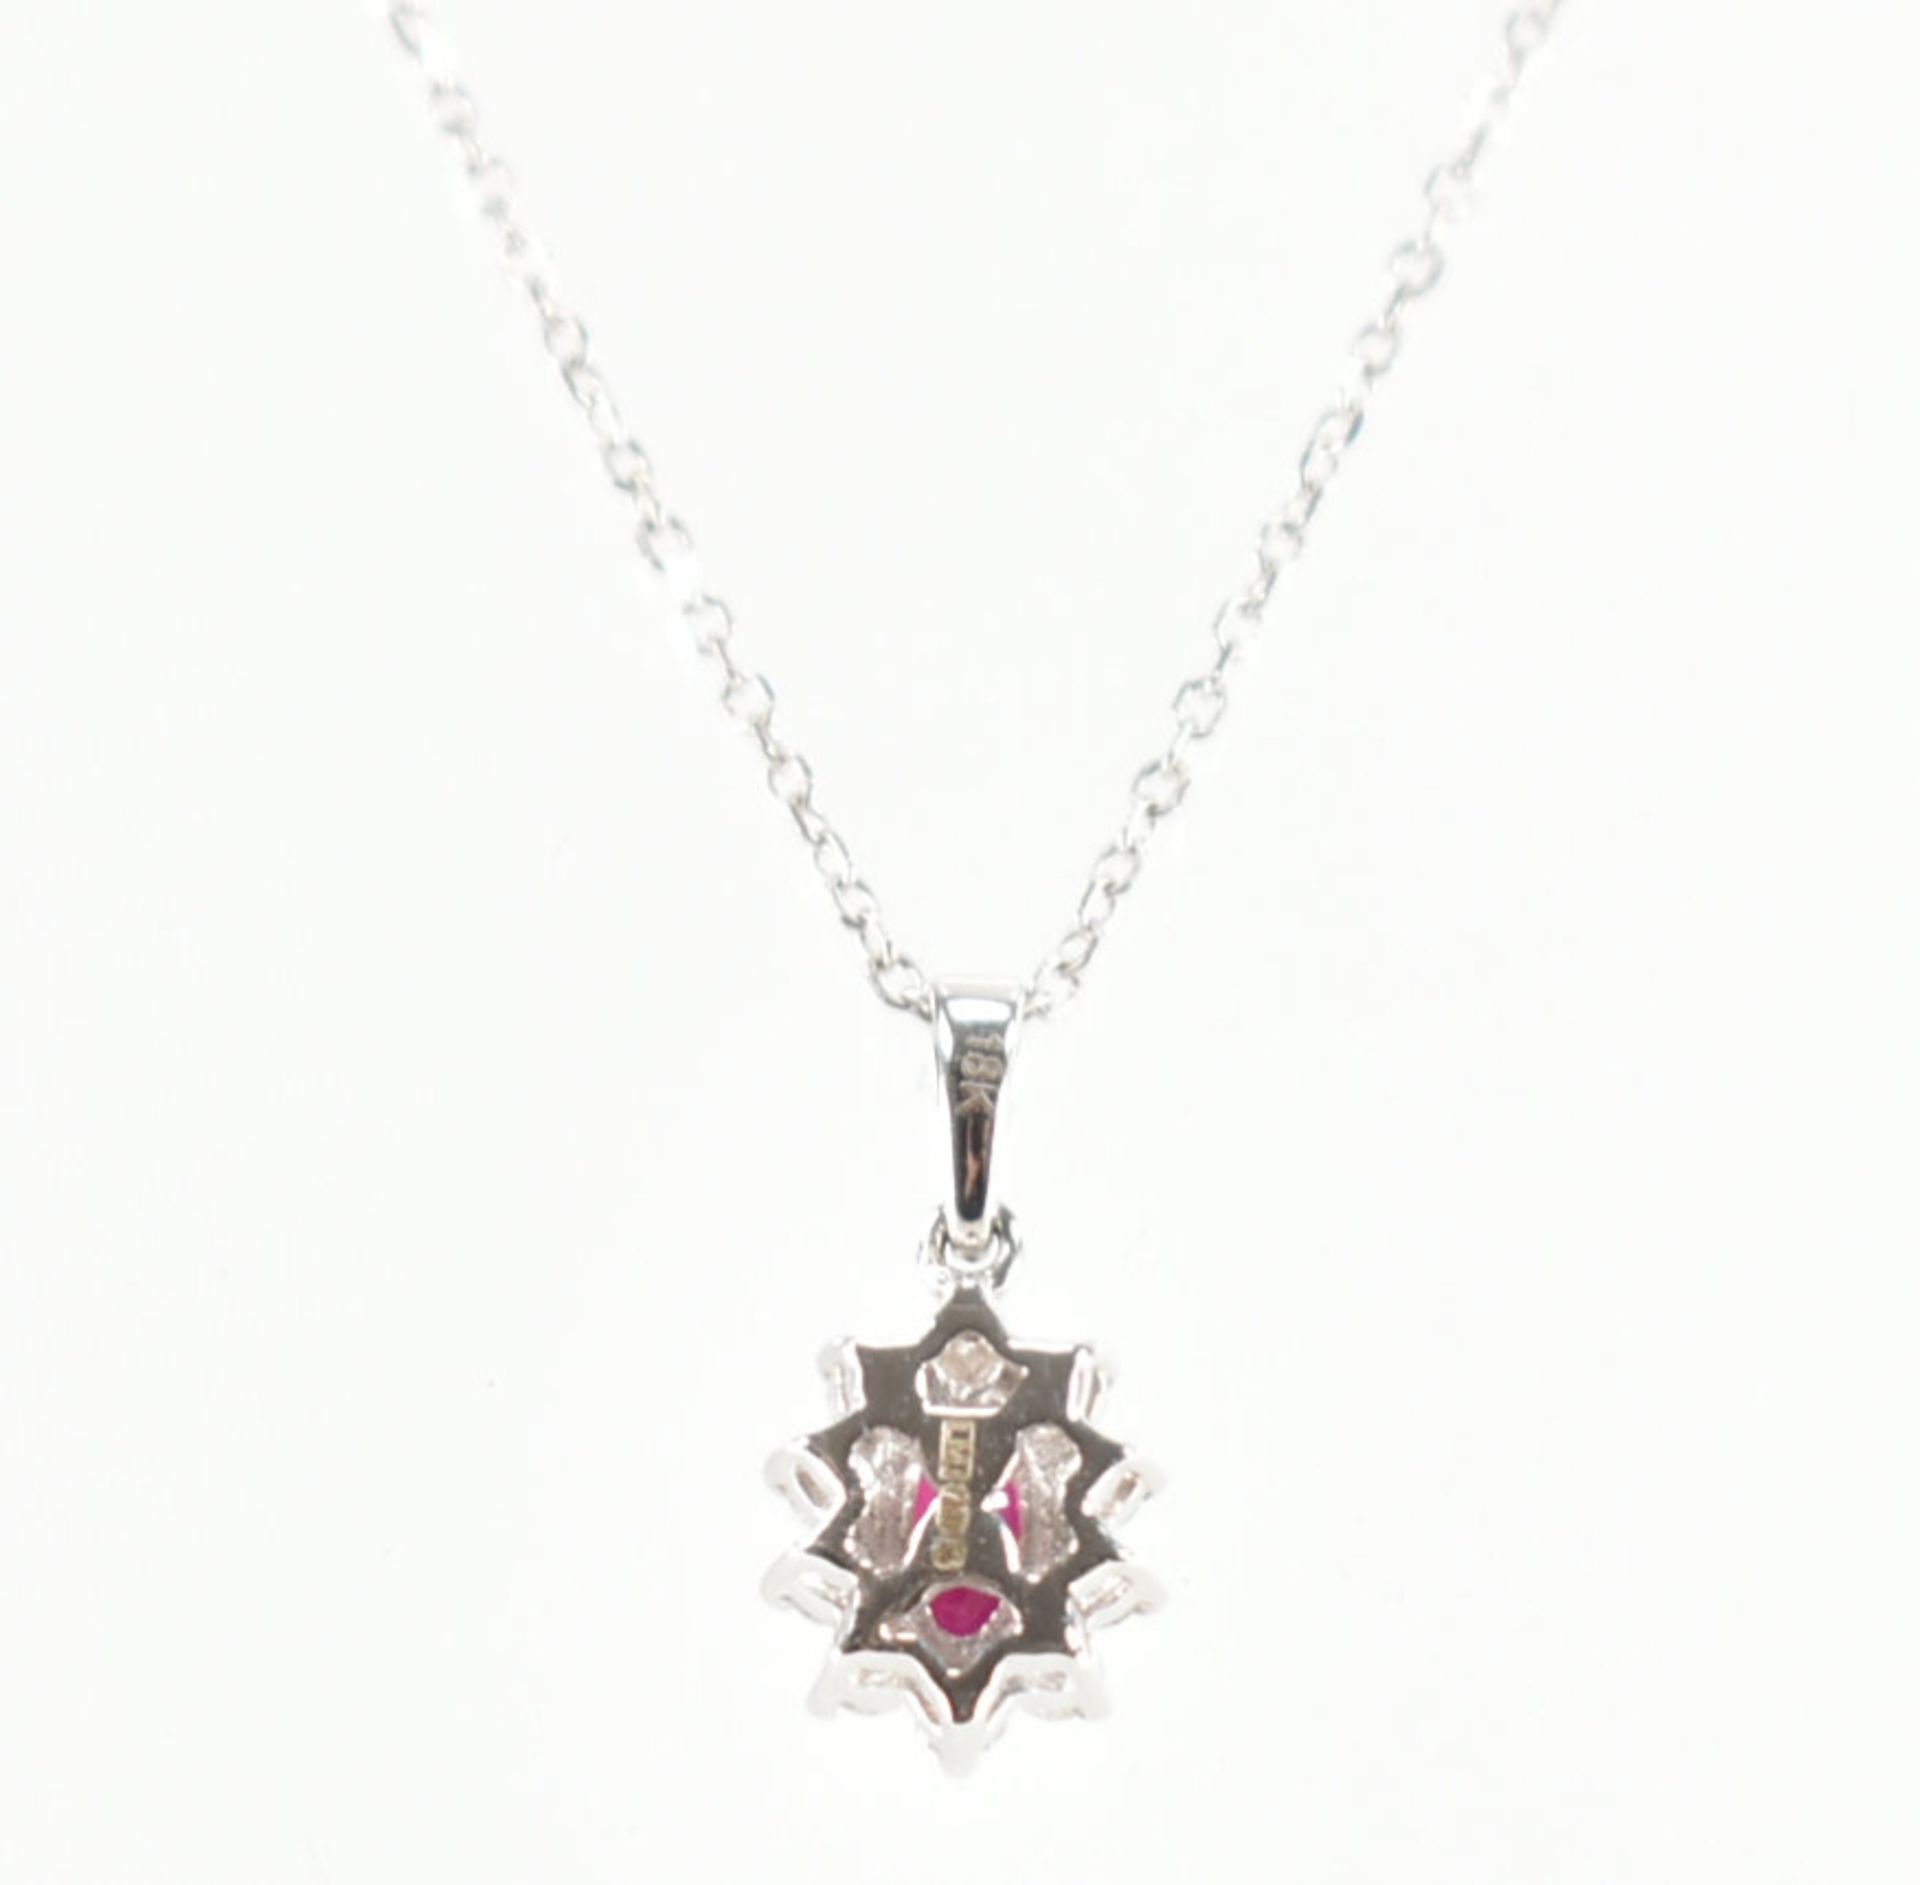 HALLMARKED 18CT WHITE GOLD DIAMOND & RED STONE NECKLACE PENDANT & CHAIN - Image 4 of 6